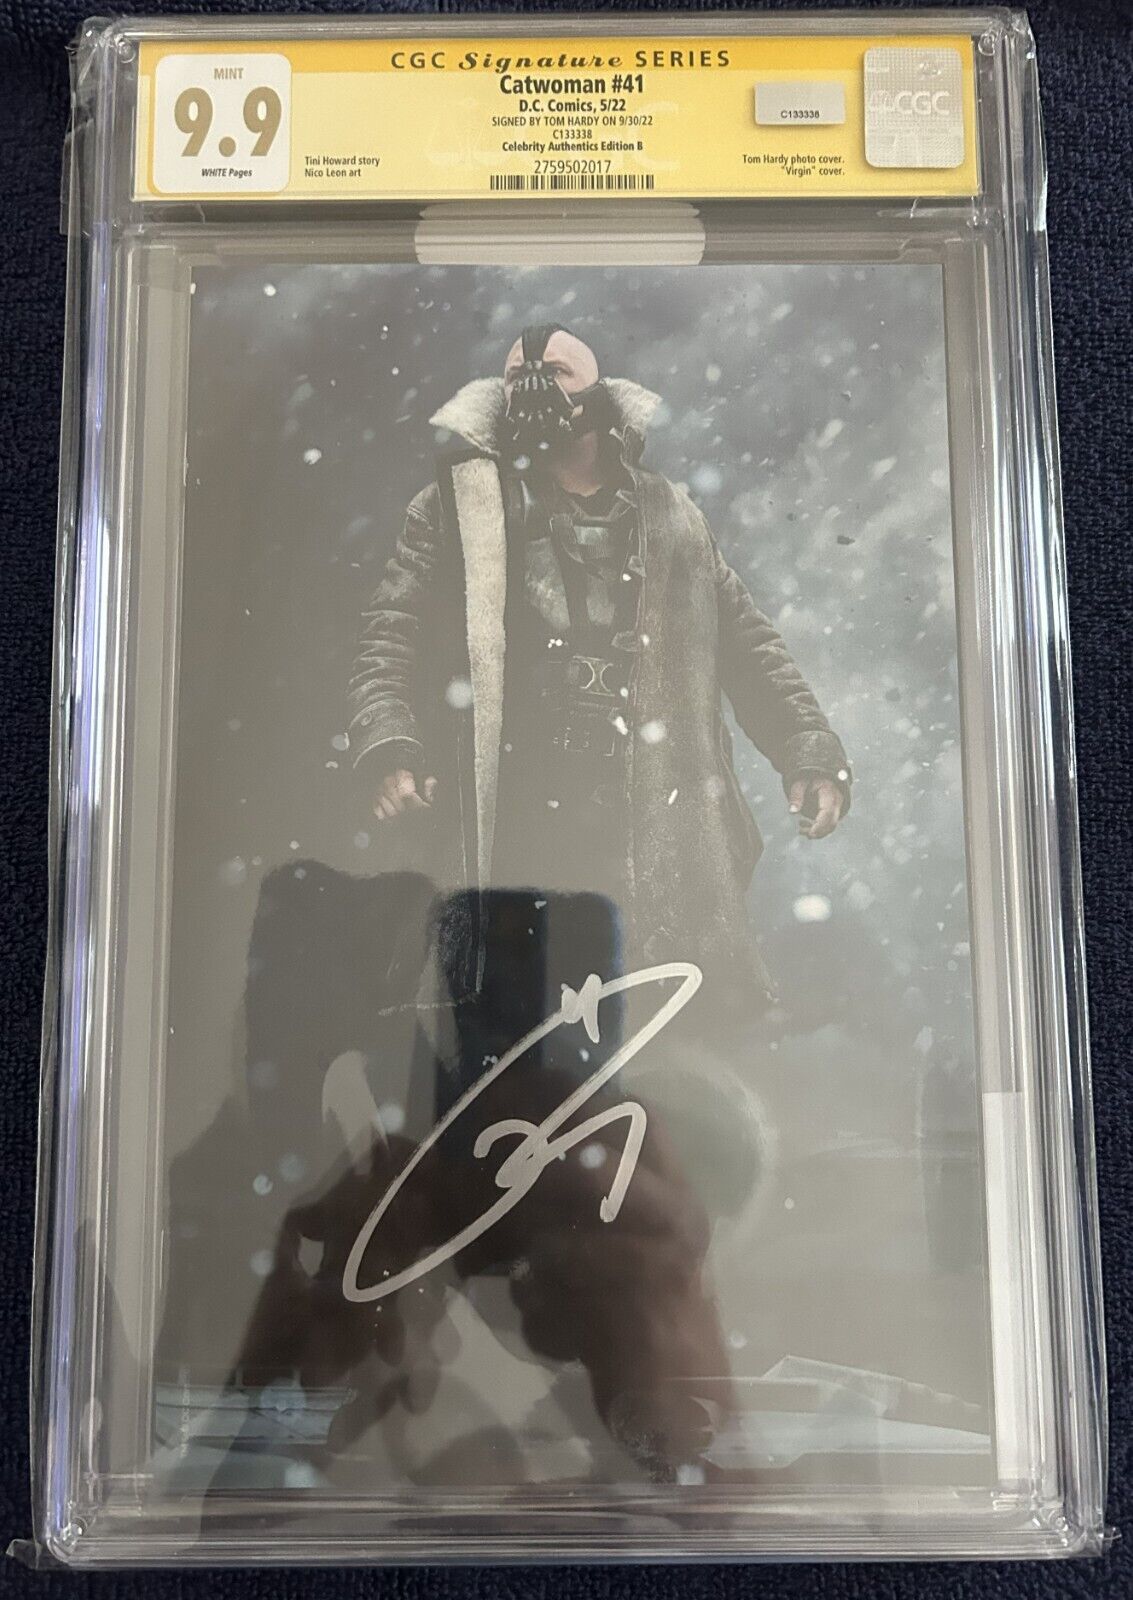 Catwoman #41 Bane photo variant__CGC 9.9 MINT SS__Signed by Tom Hardy